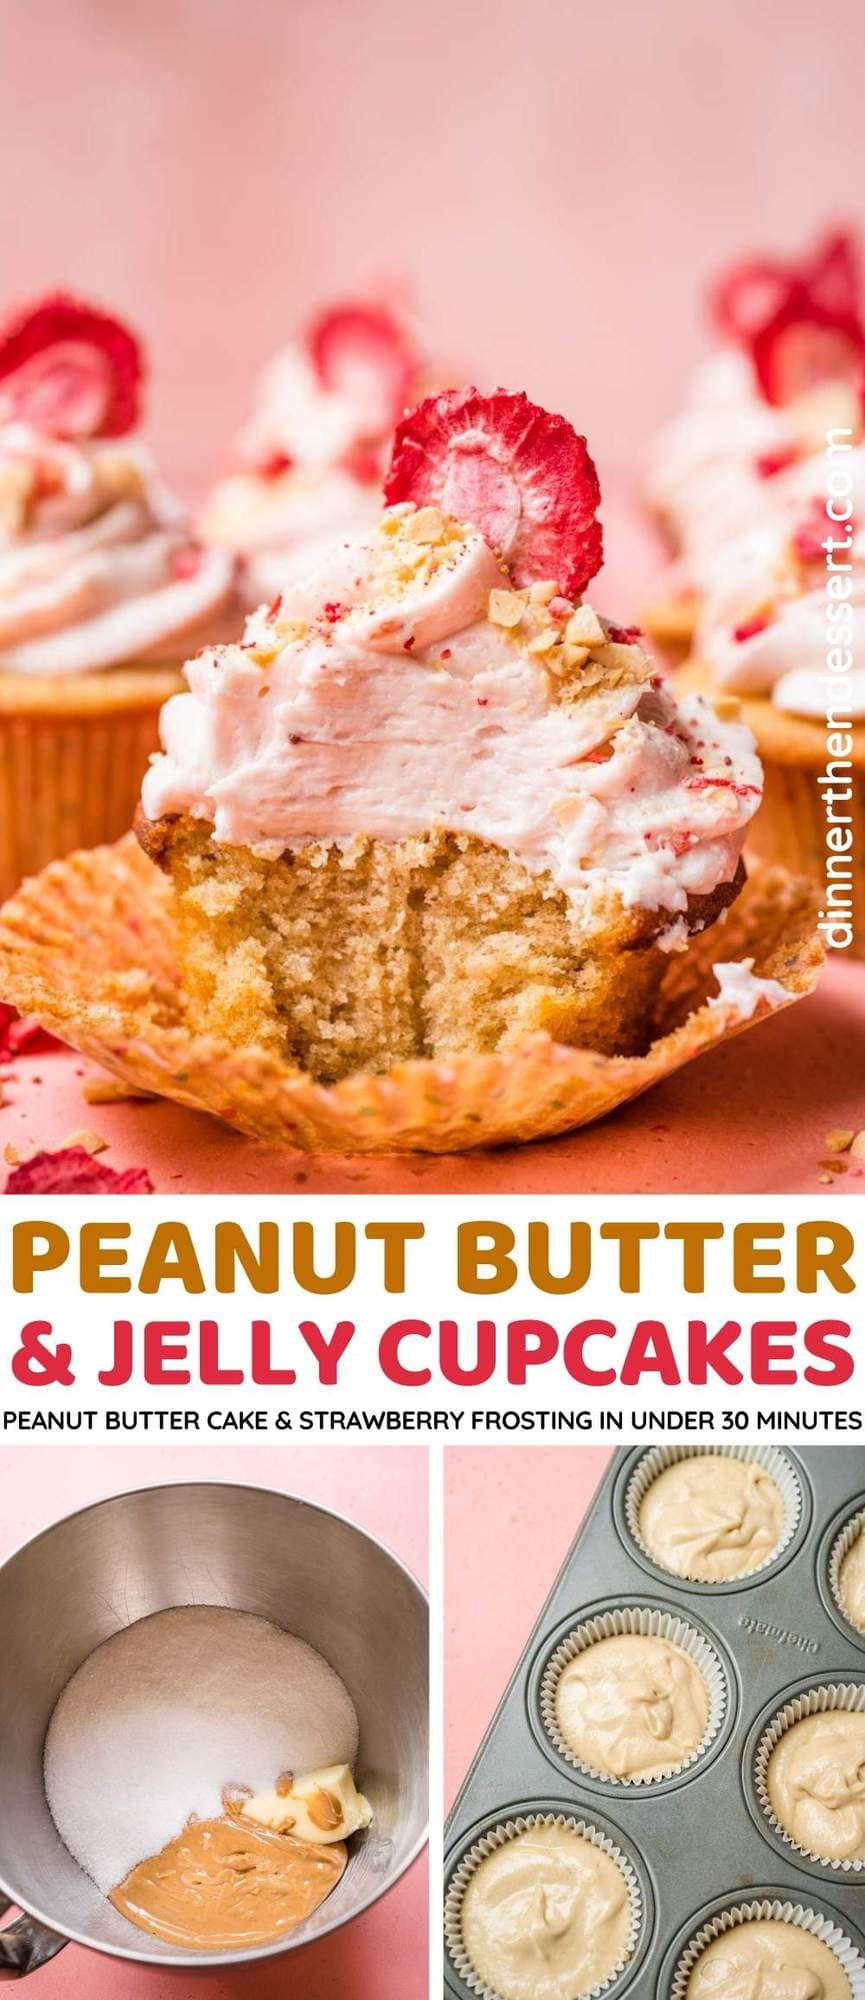 Peanut Butter and Jelly Cupcakes collage